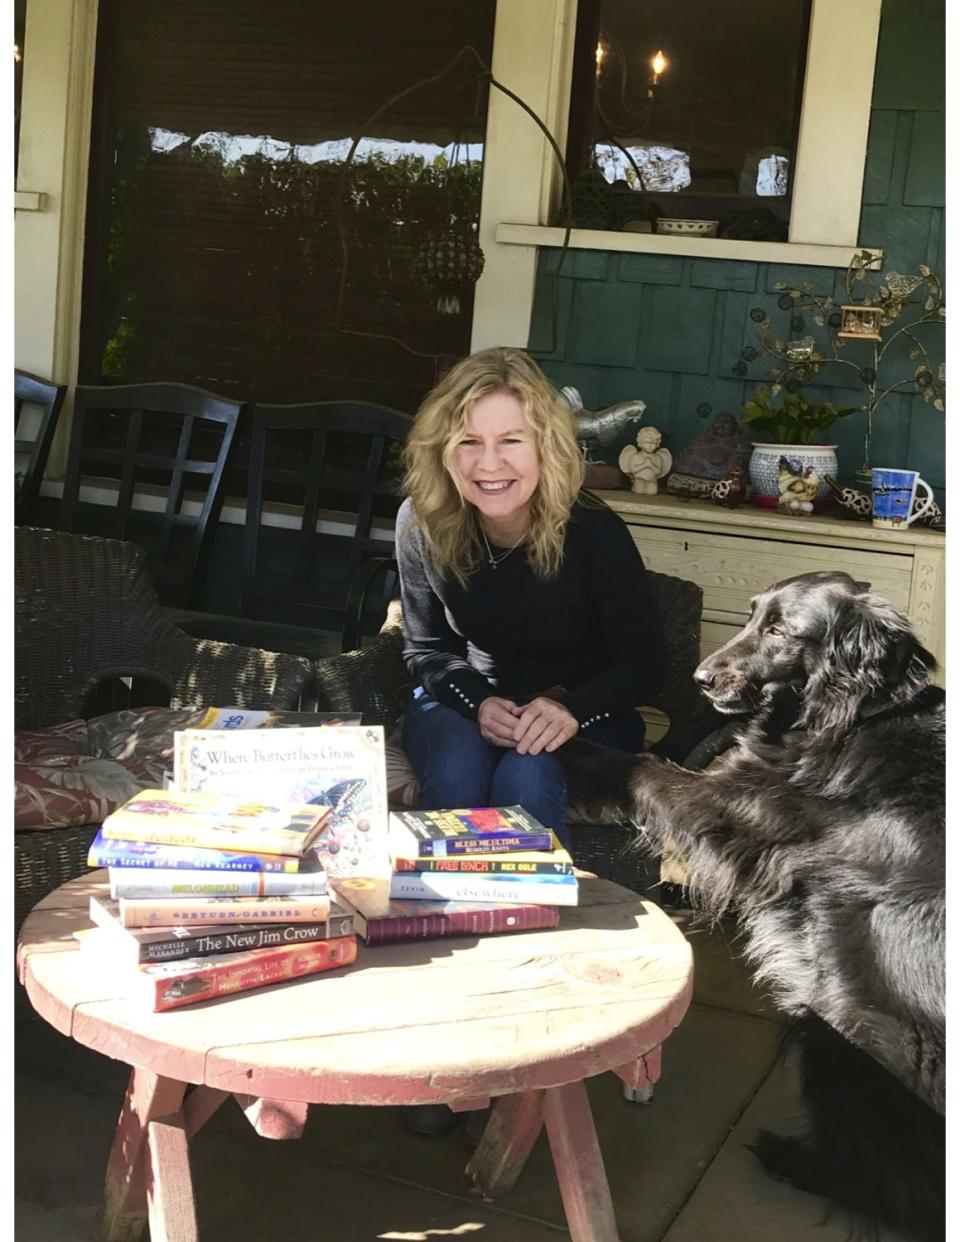 Susan Straight organized a "Fence Library" in front of her house in Riverside.